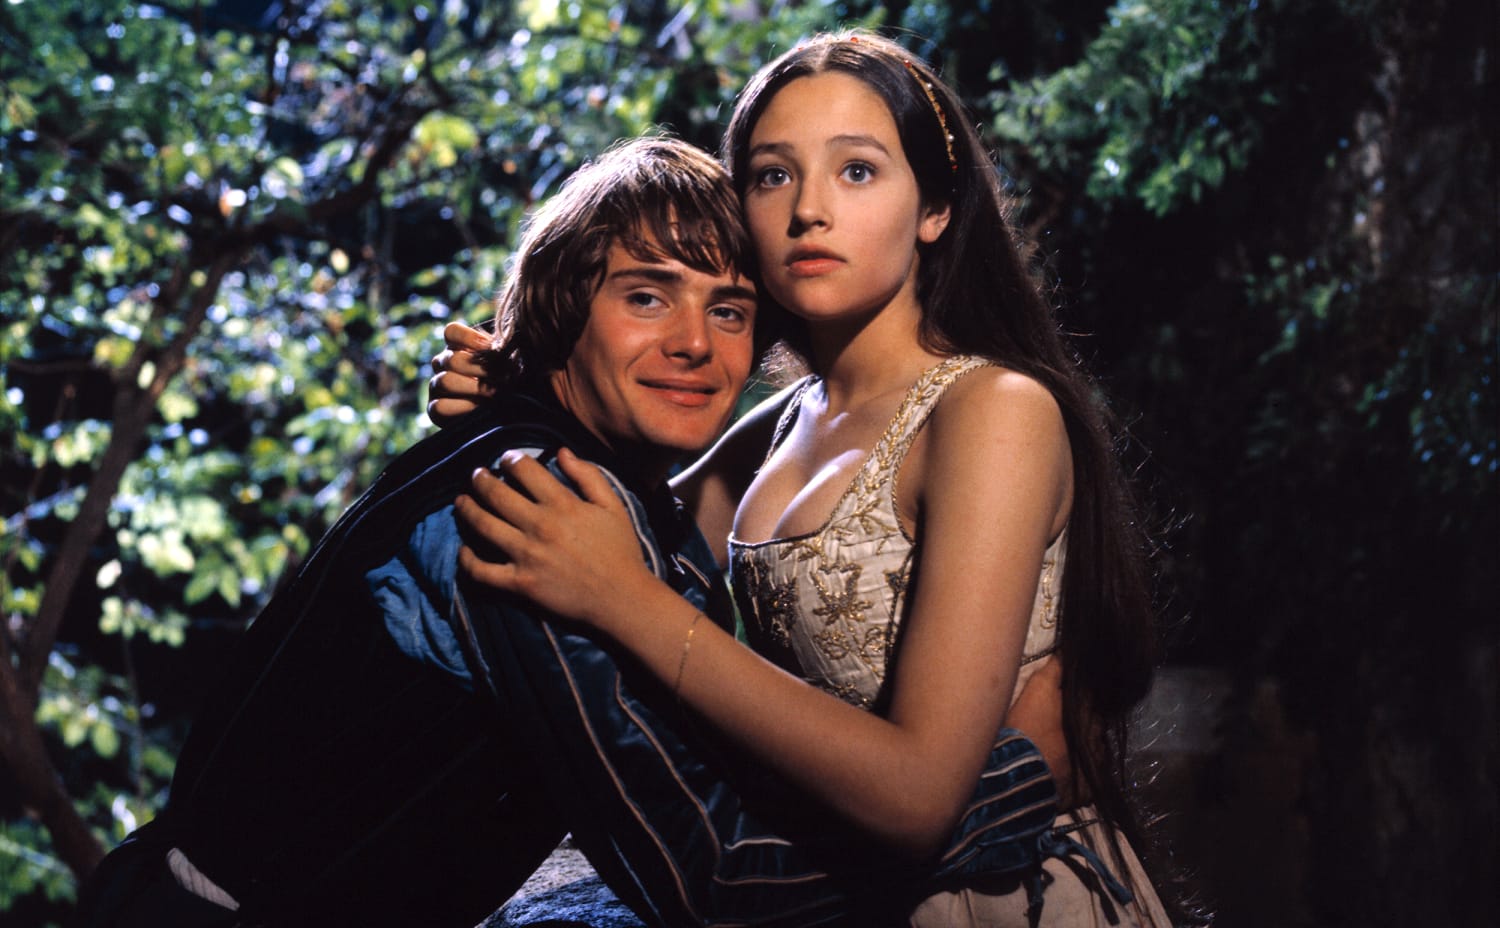 Judge throws out 'Romeo & Juliet' actors' lawsuit that says they were forced to do nude scene as teens